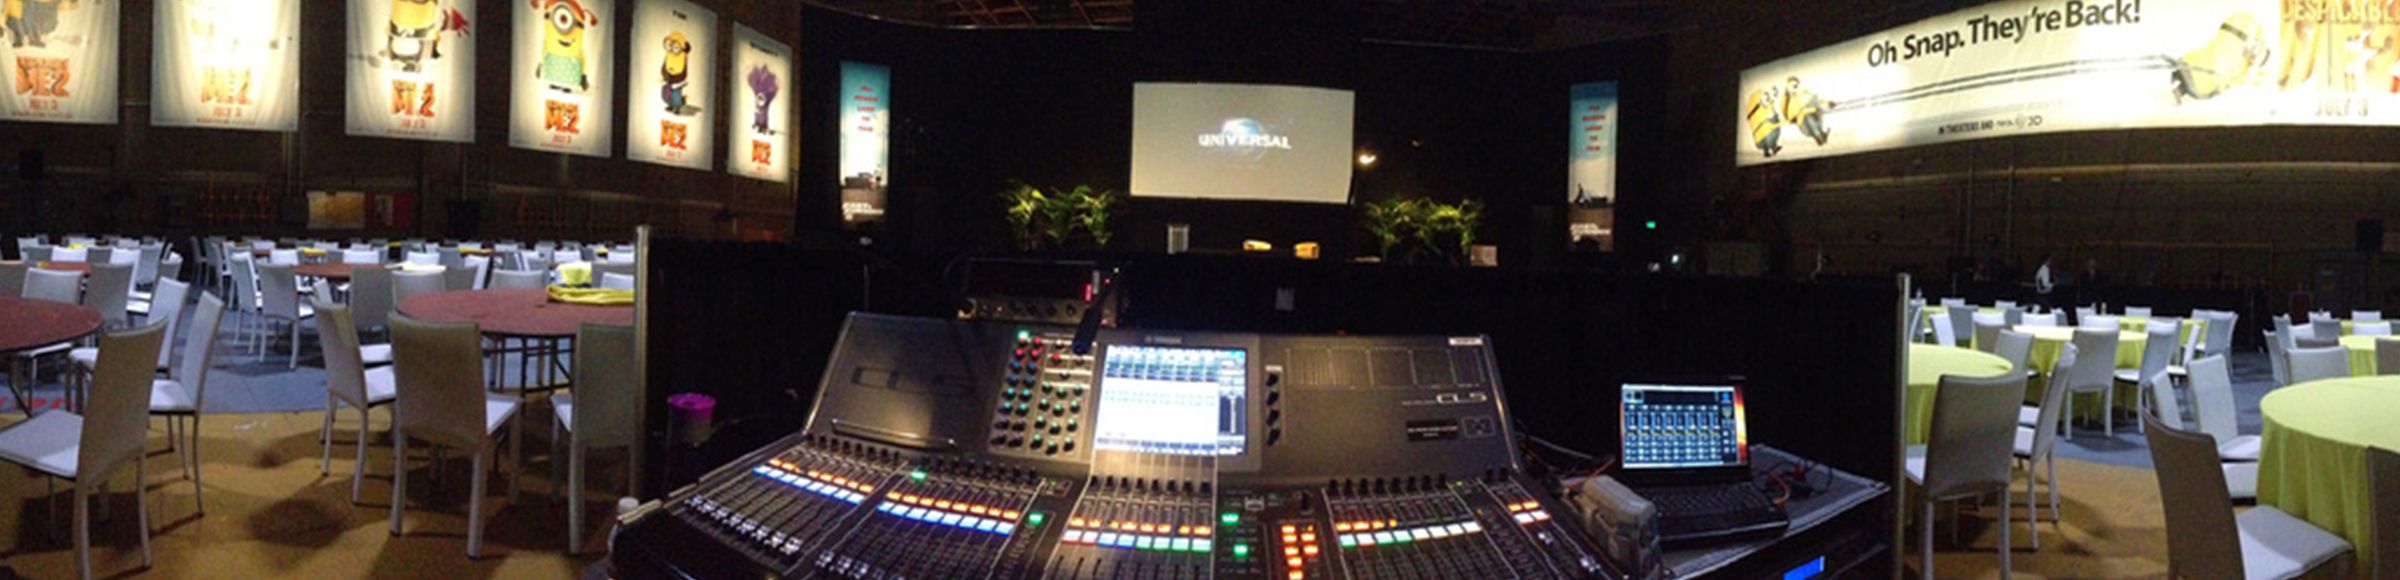 Hollywood Sound Systems - Pro Audio Solutions, Sales, Rentals